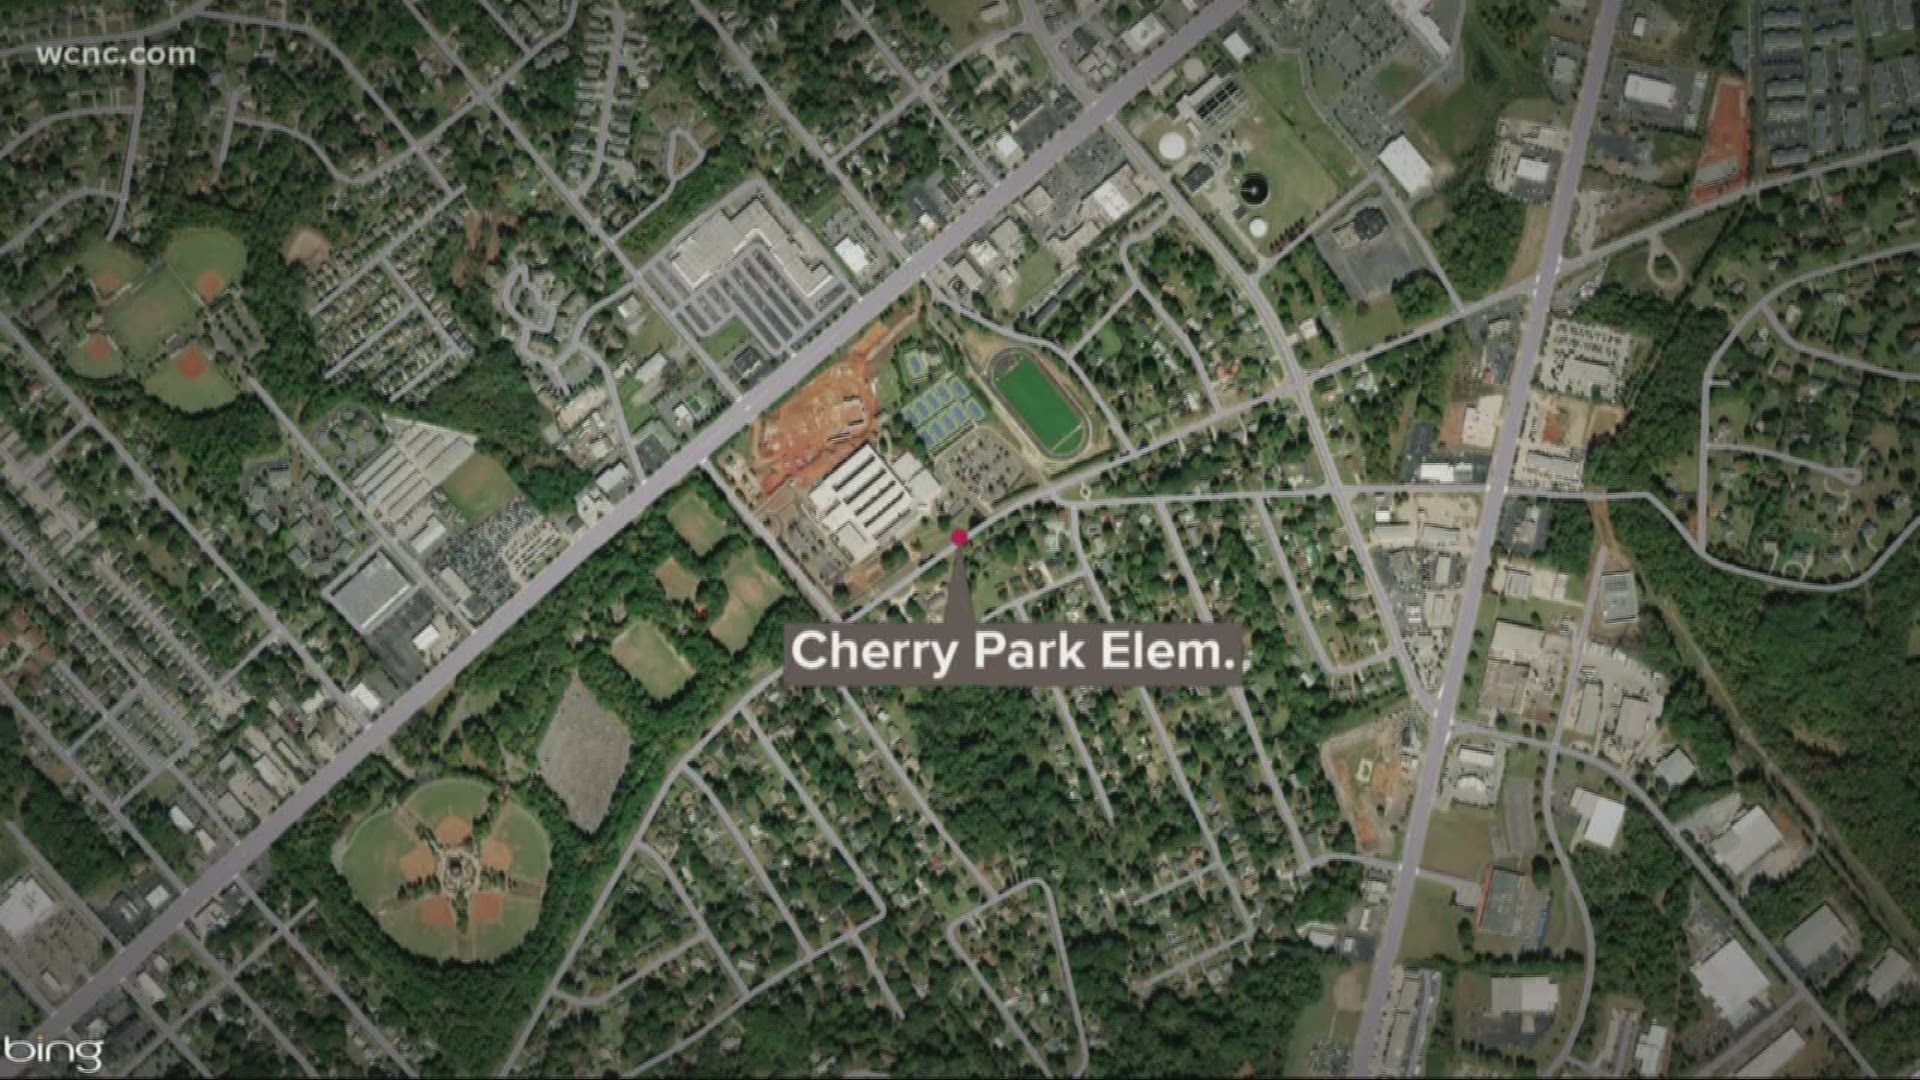 Cherry Park Elementary School of Language Immersion was put on lockdown for about half an hour Thursday afternoon. According to the district, the suspect who made the threat has been located and questioned.